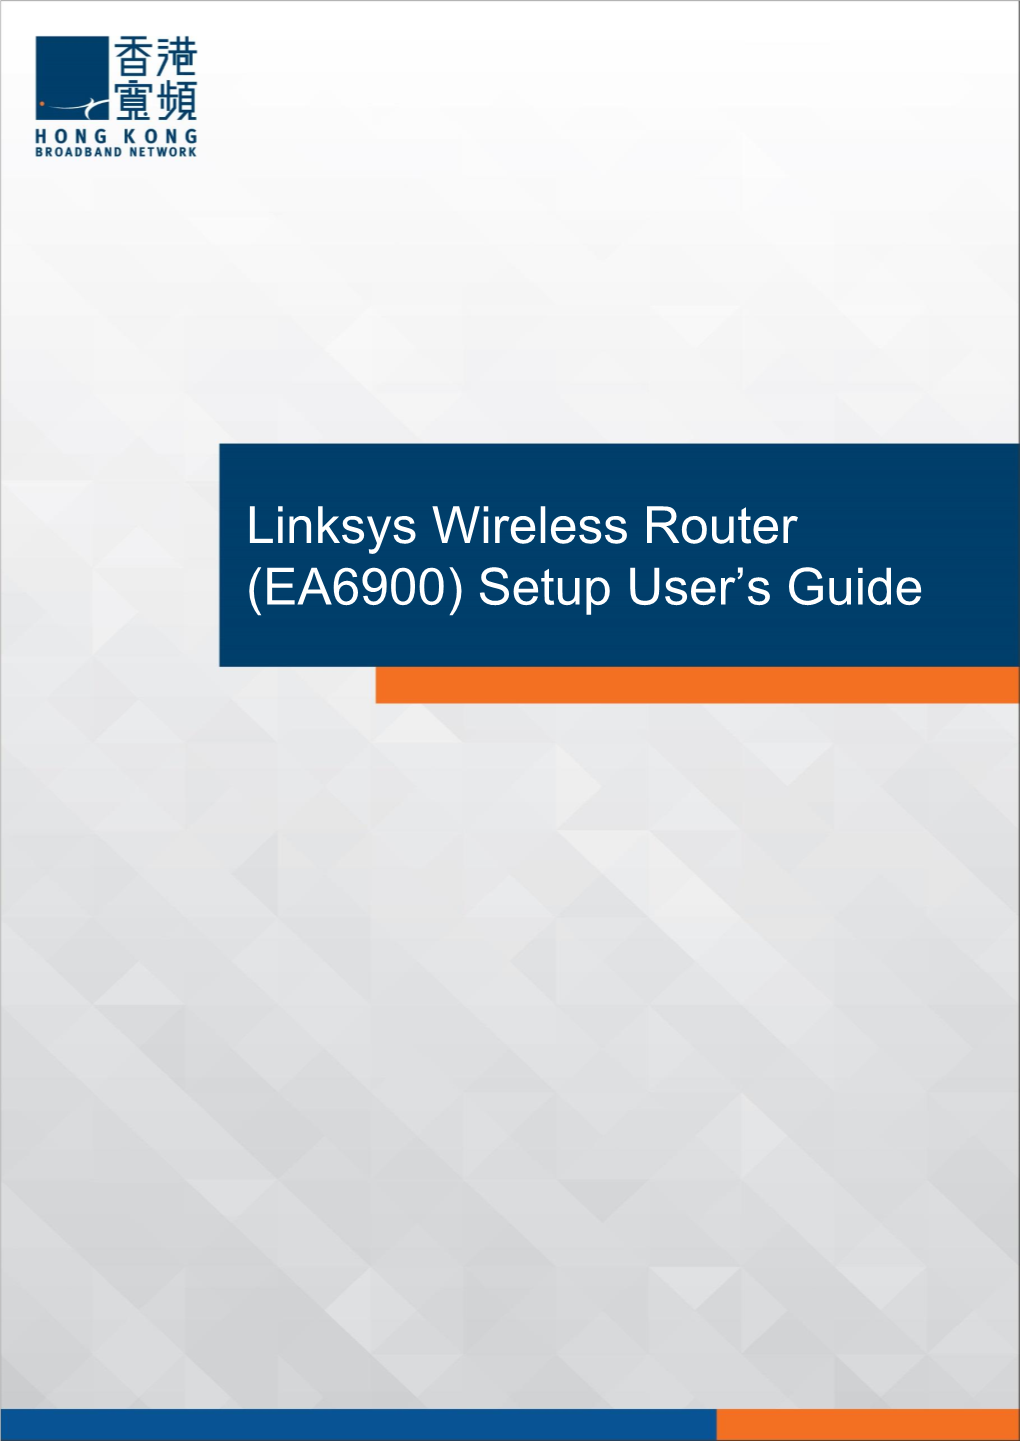 Linksys Wireless Router (EA6900) Setup User's Guide